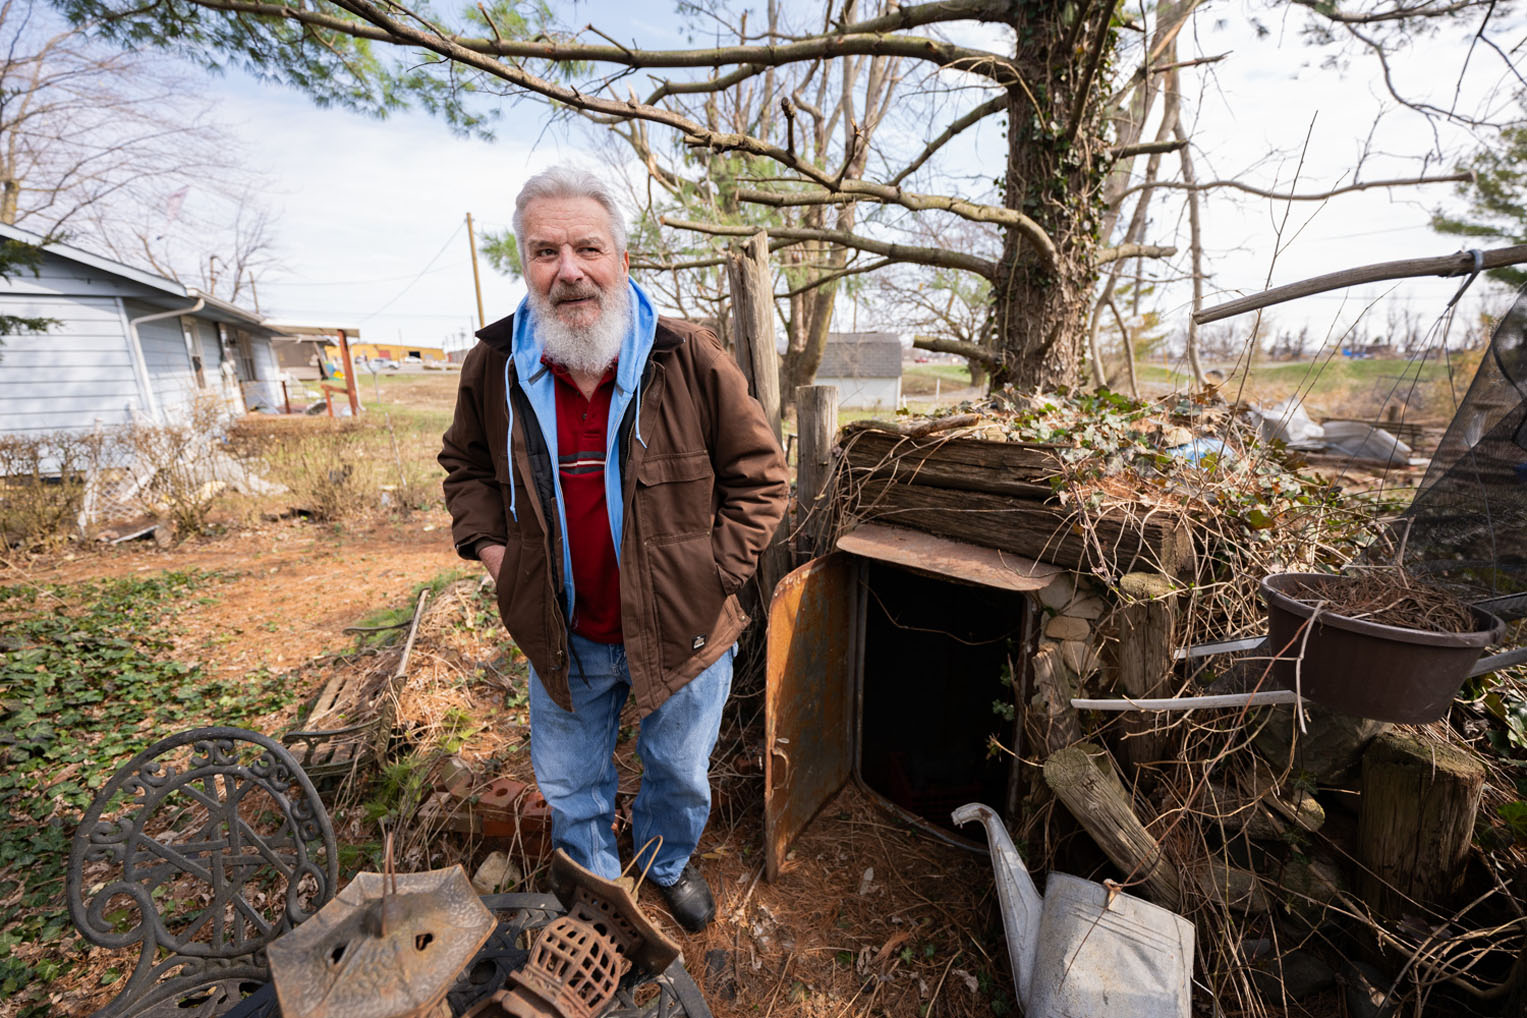 Steve Daggett rushed to his homemade shelter as the tornado passed overhead.